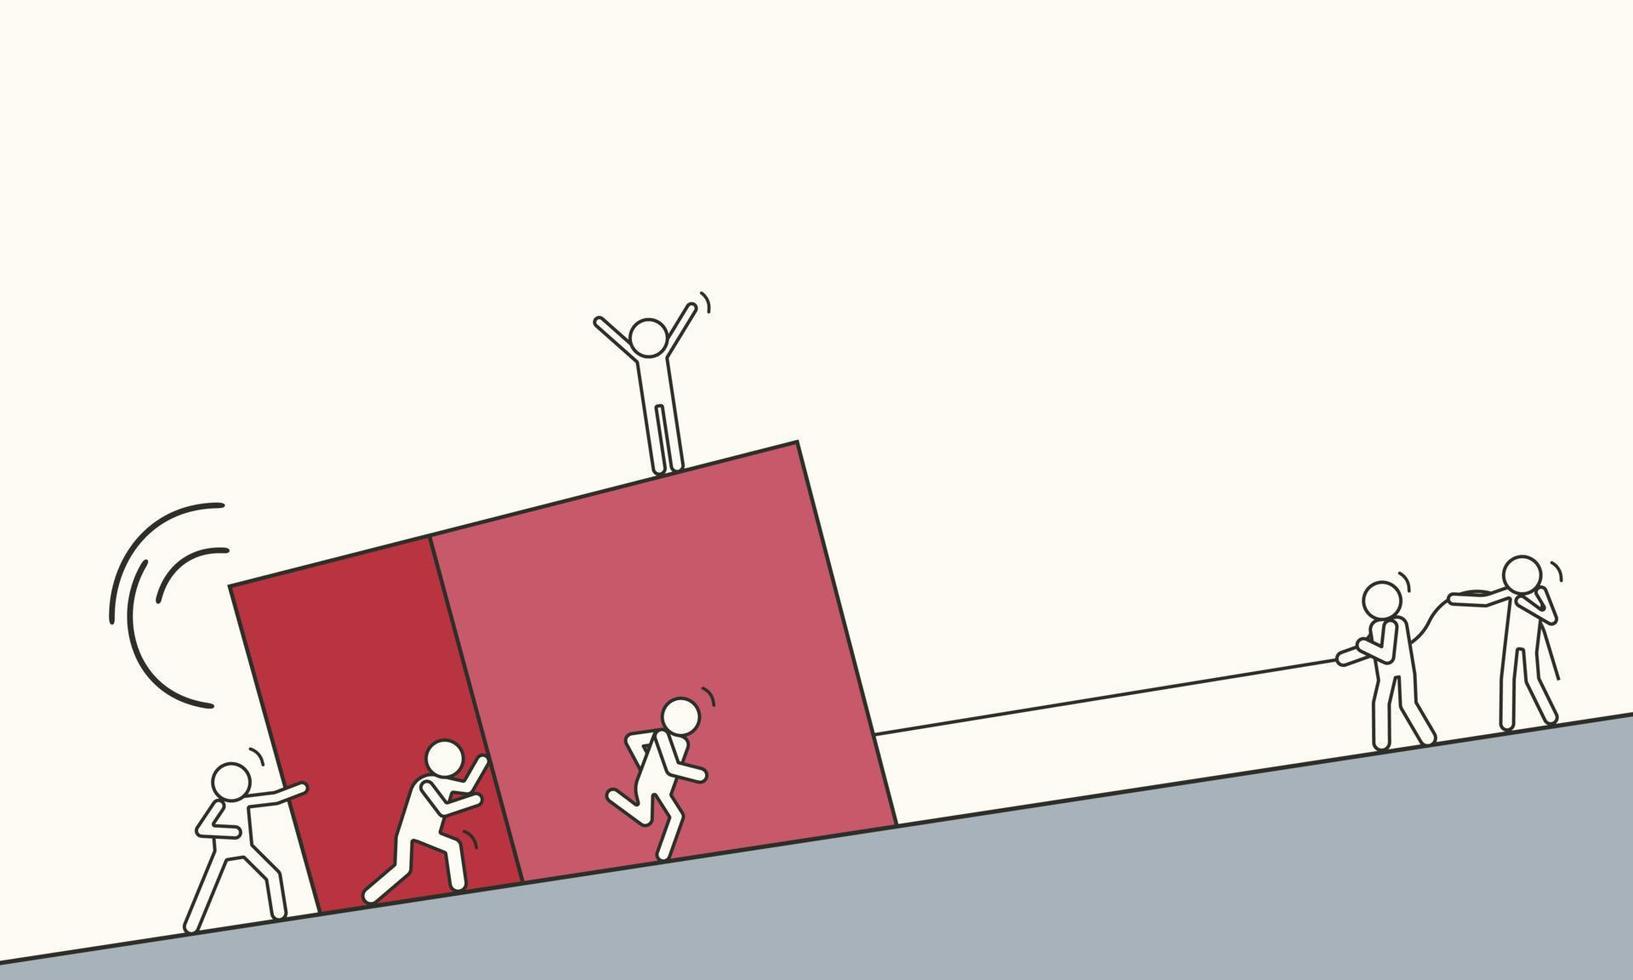 Little drawn people lift a big red cube up the mountain together. Vector illustration of team cohesion